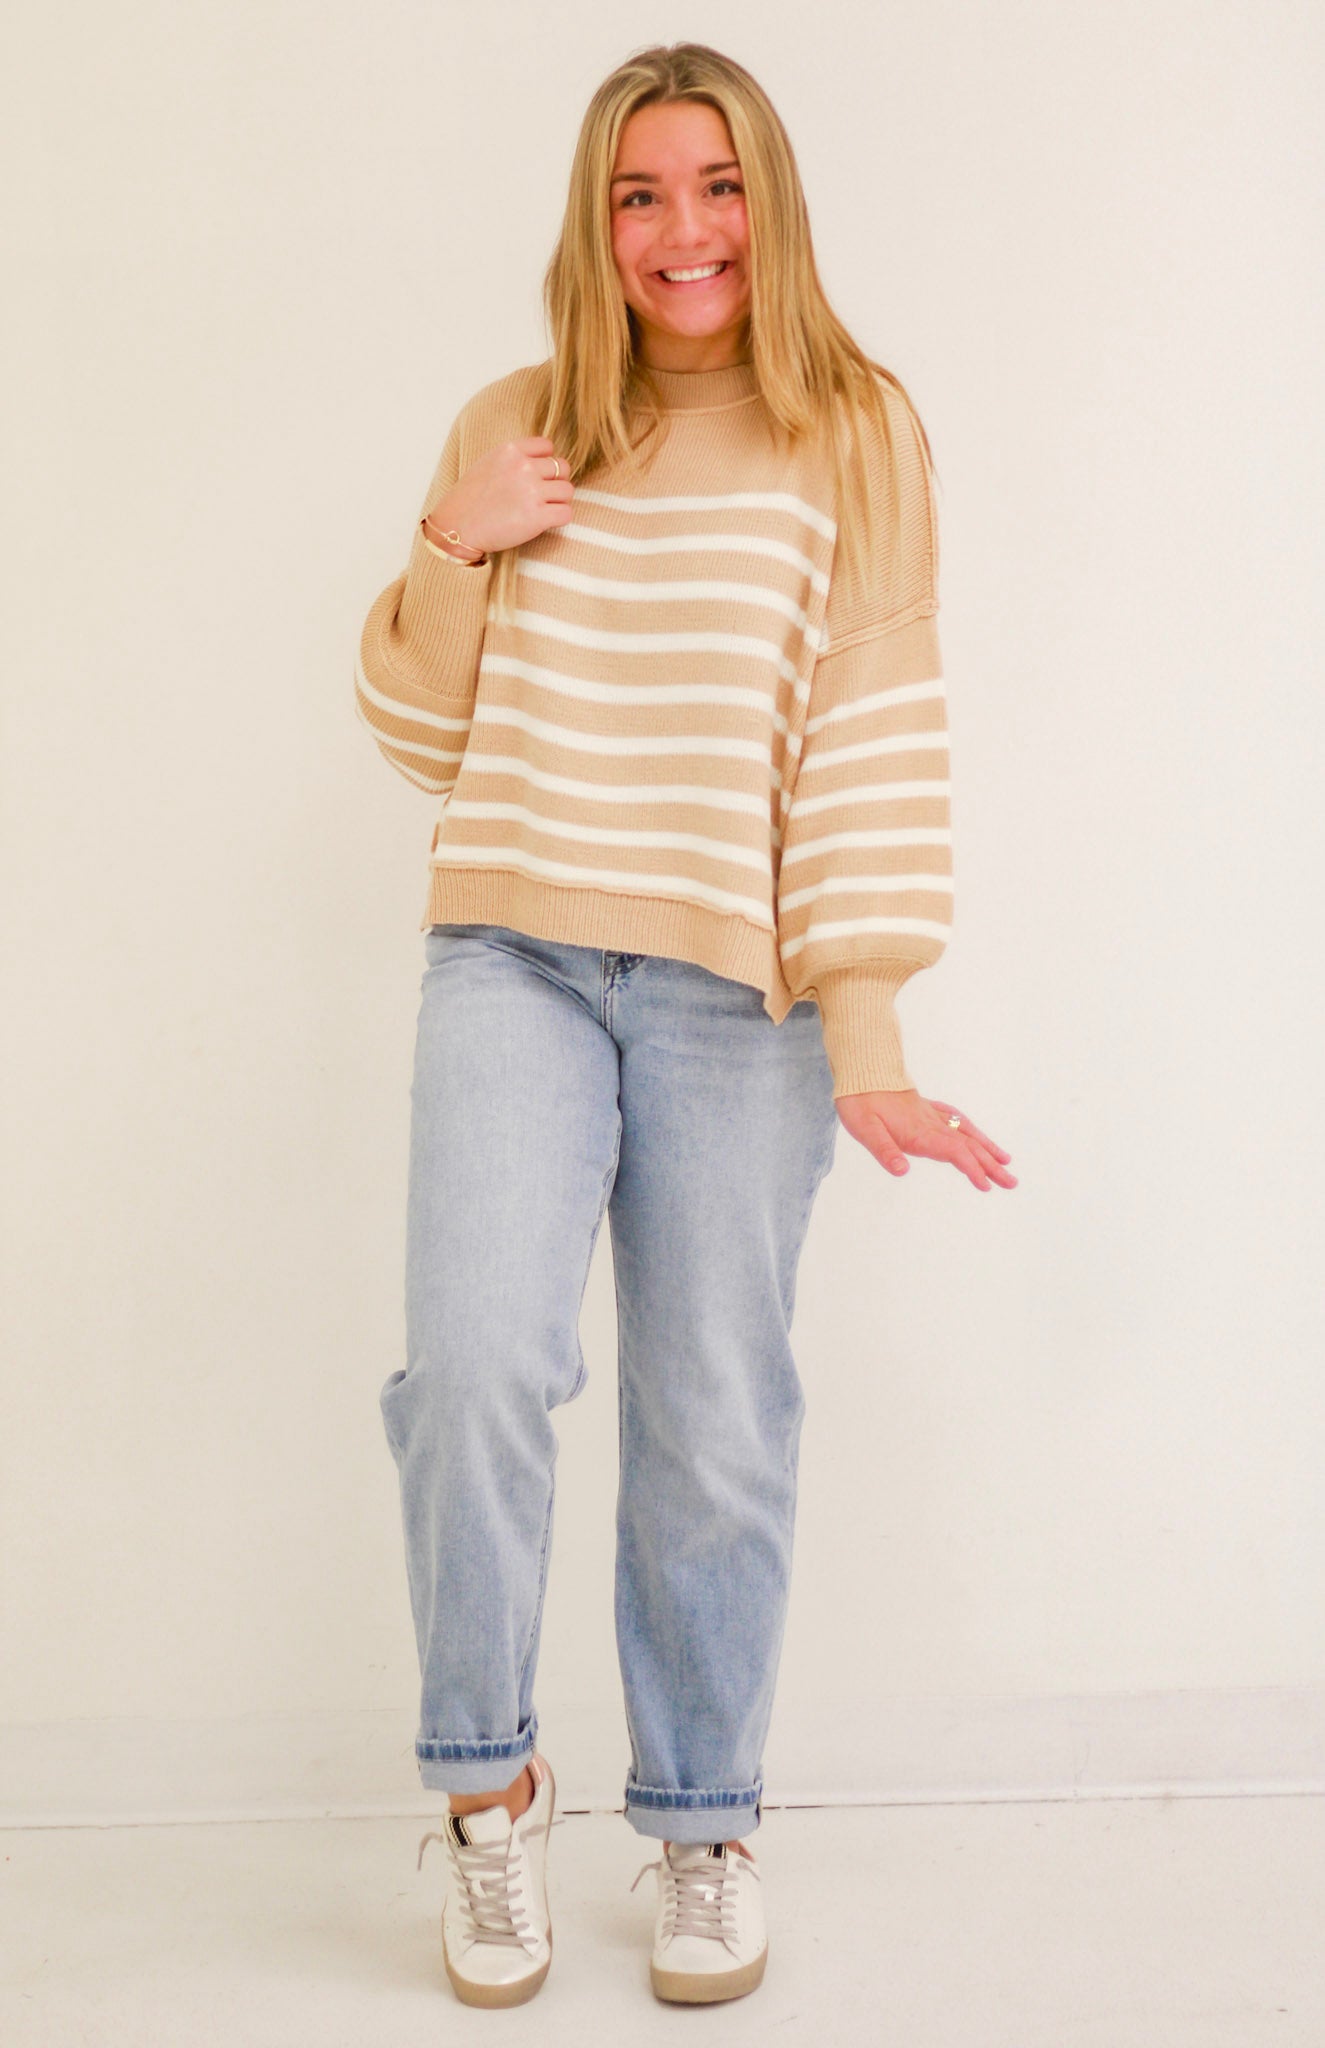 Cupid's Pick Striped Sweater in Taupe